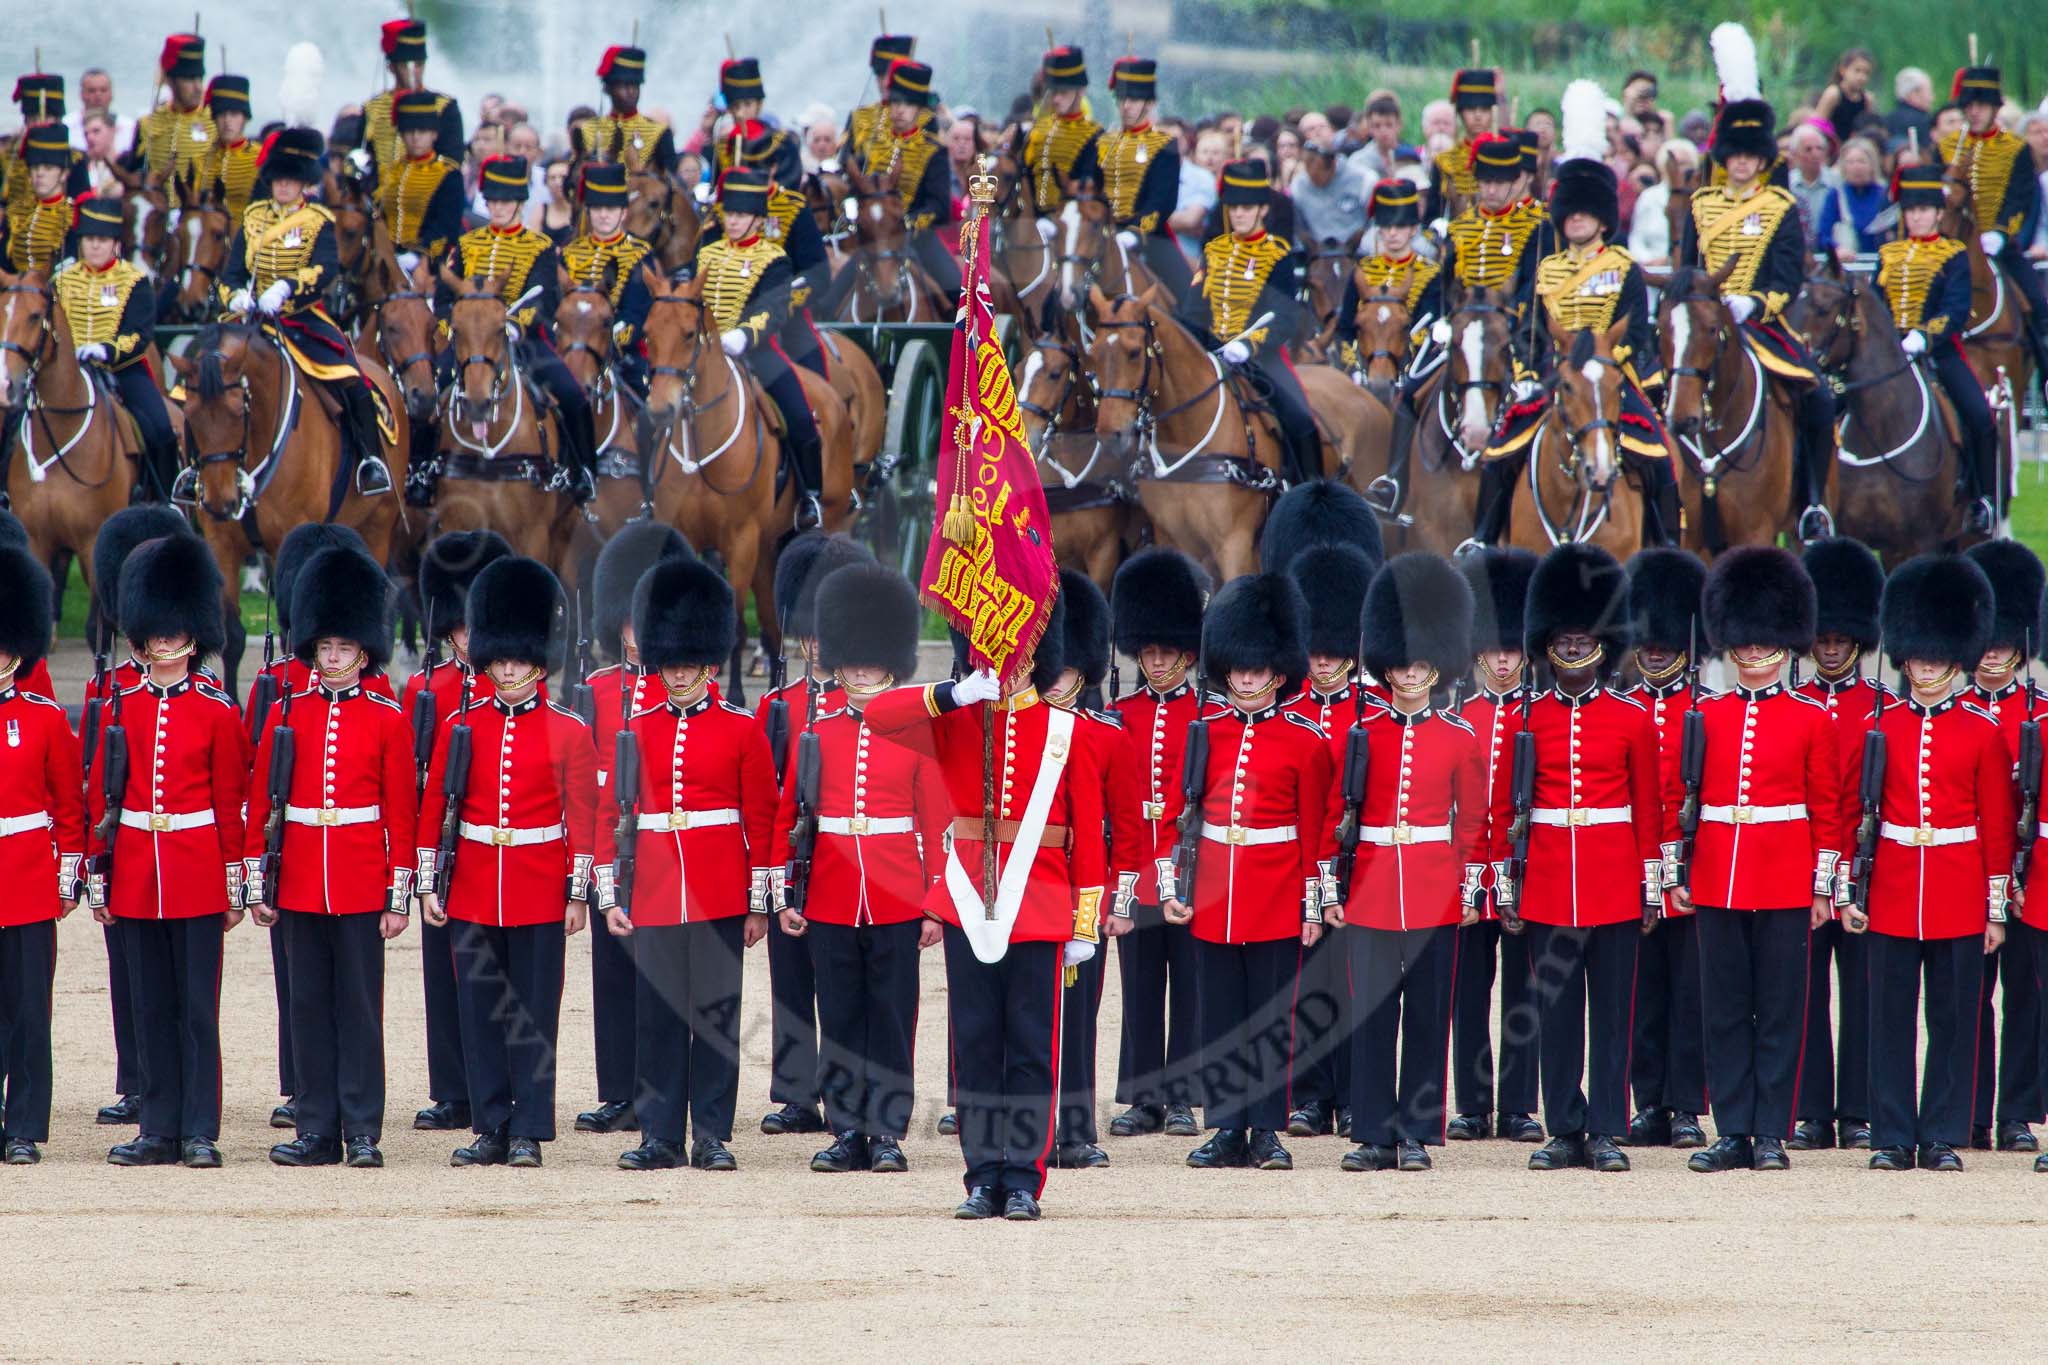 Trooping the Colour 2014.
Horse Guards Parade, Westminster,
London SW1A,

United Kingdom,
on 14 June 2014 at 11:52, image #710